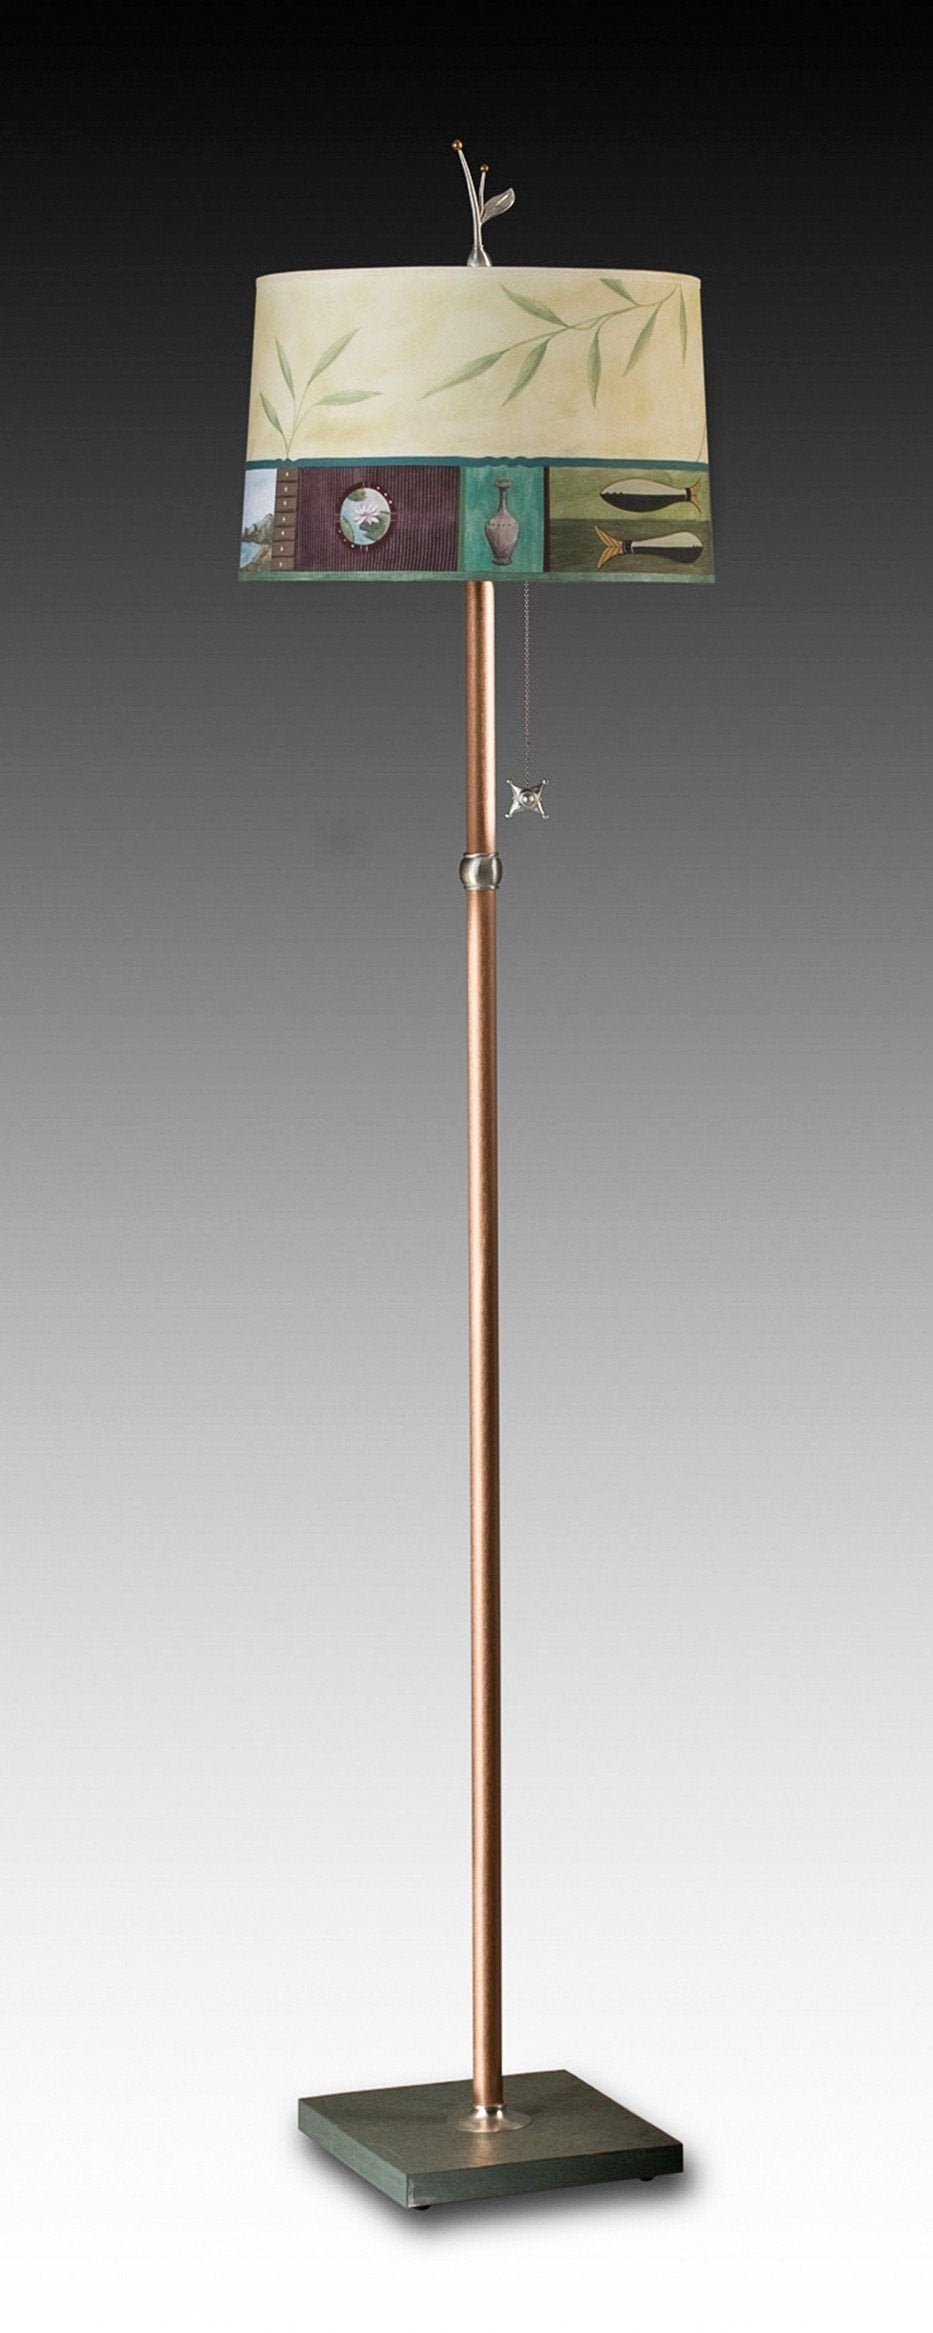 Copper Floor Lamp with Large Drum Shade in Twin Fish